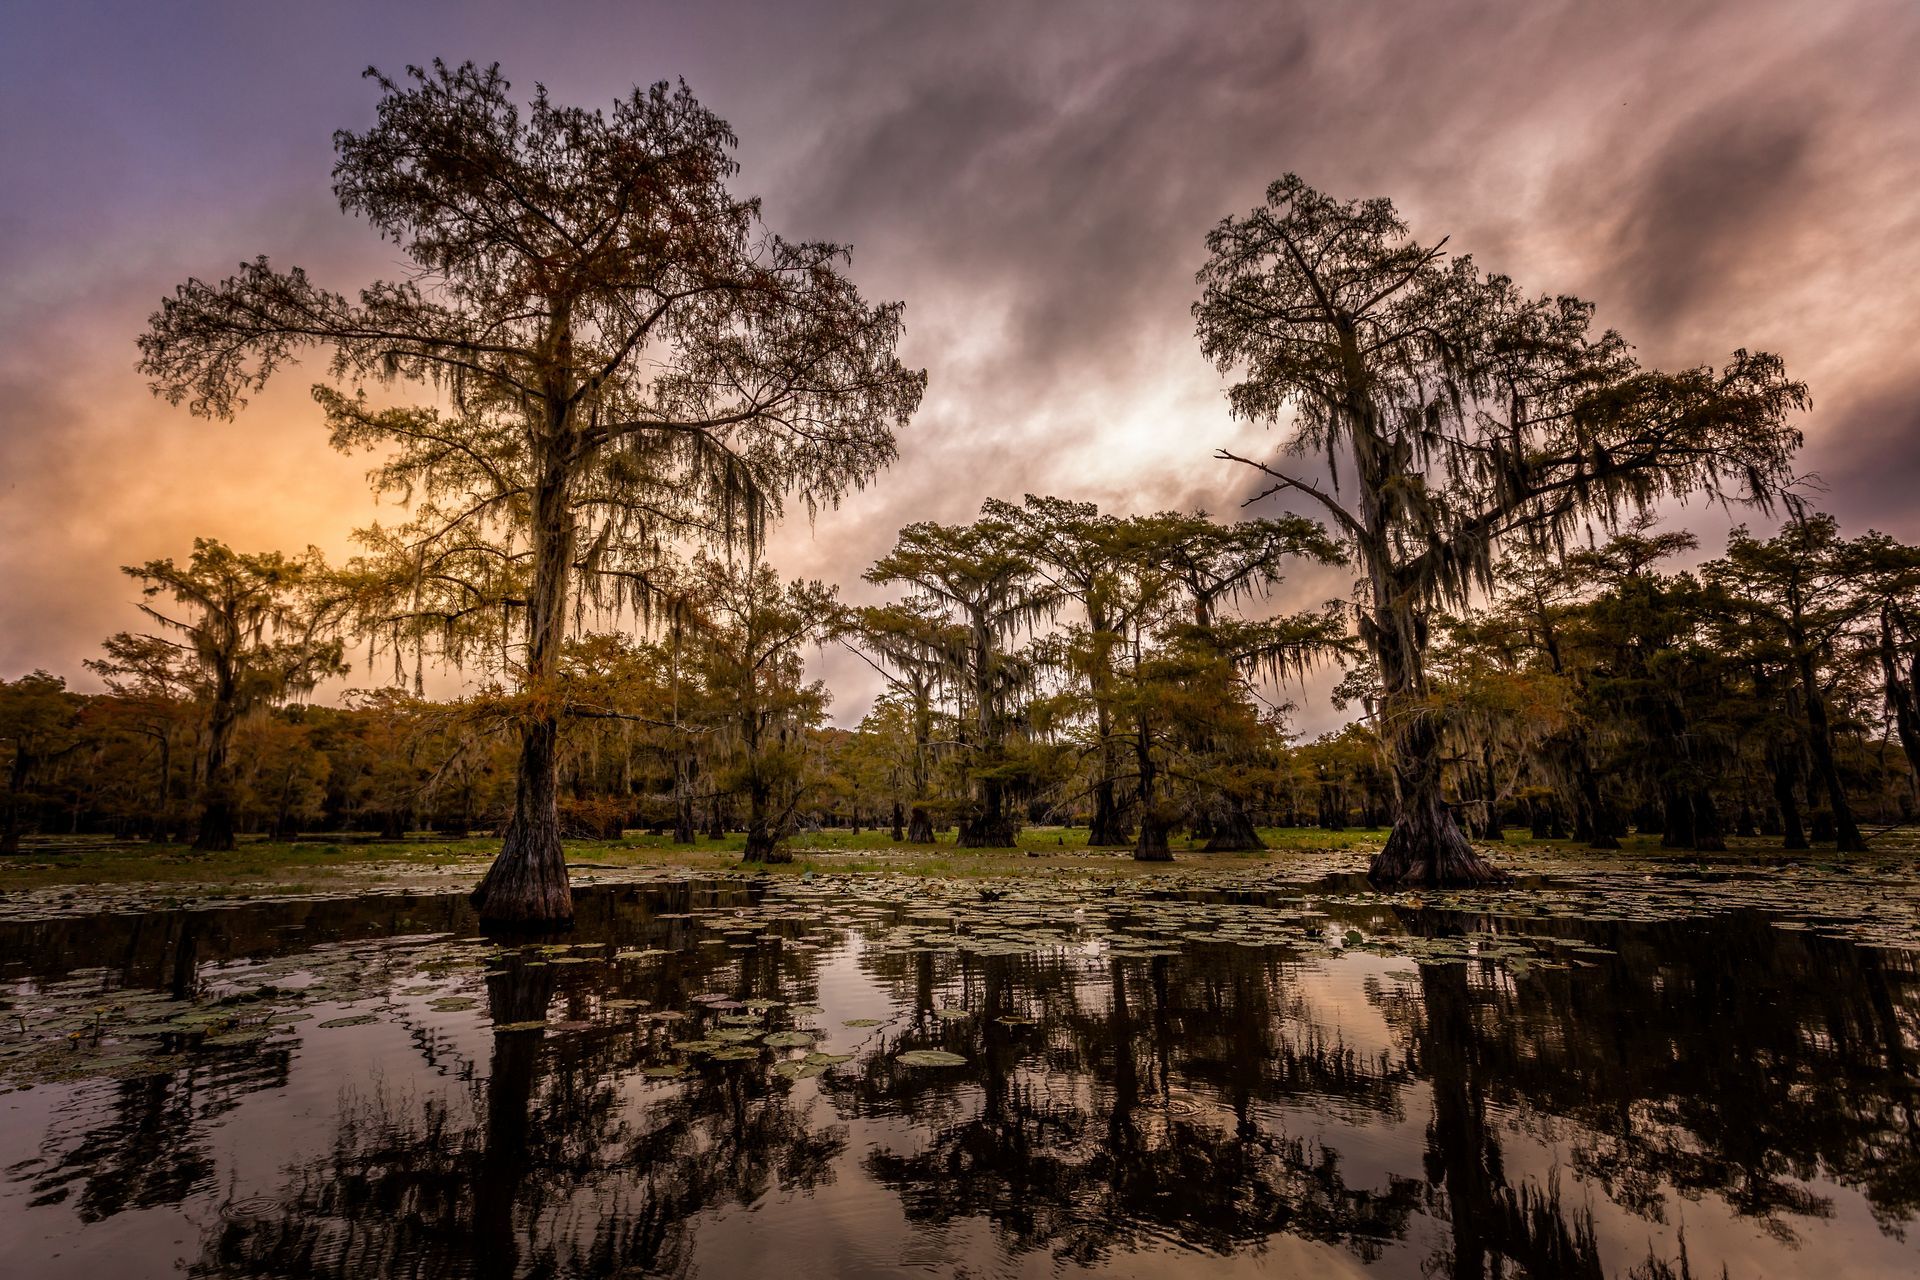 A swamp with trees and a cloudy sky in the background